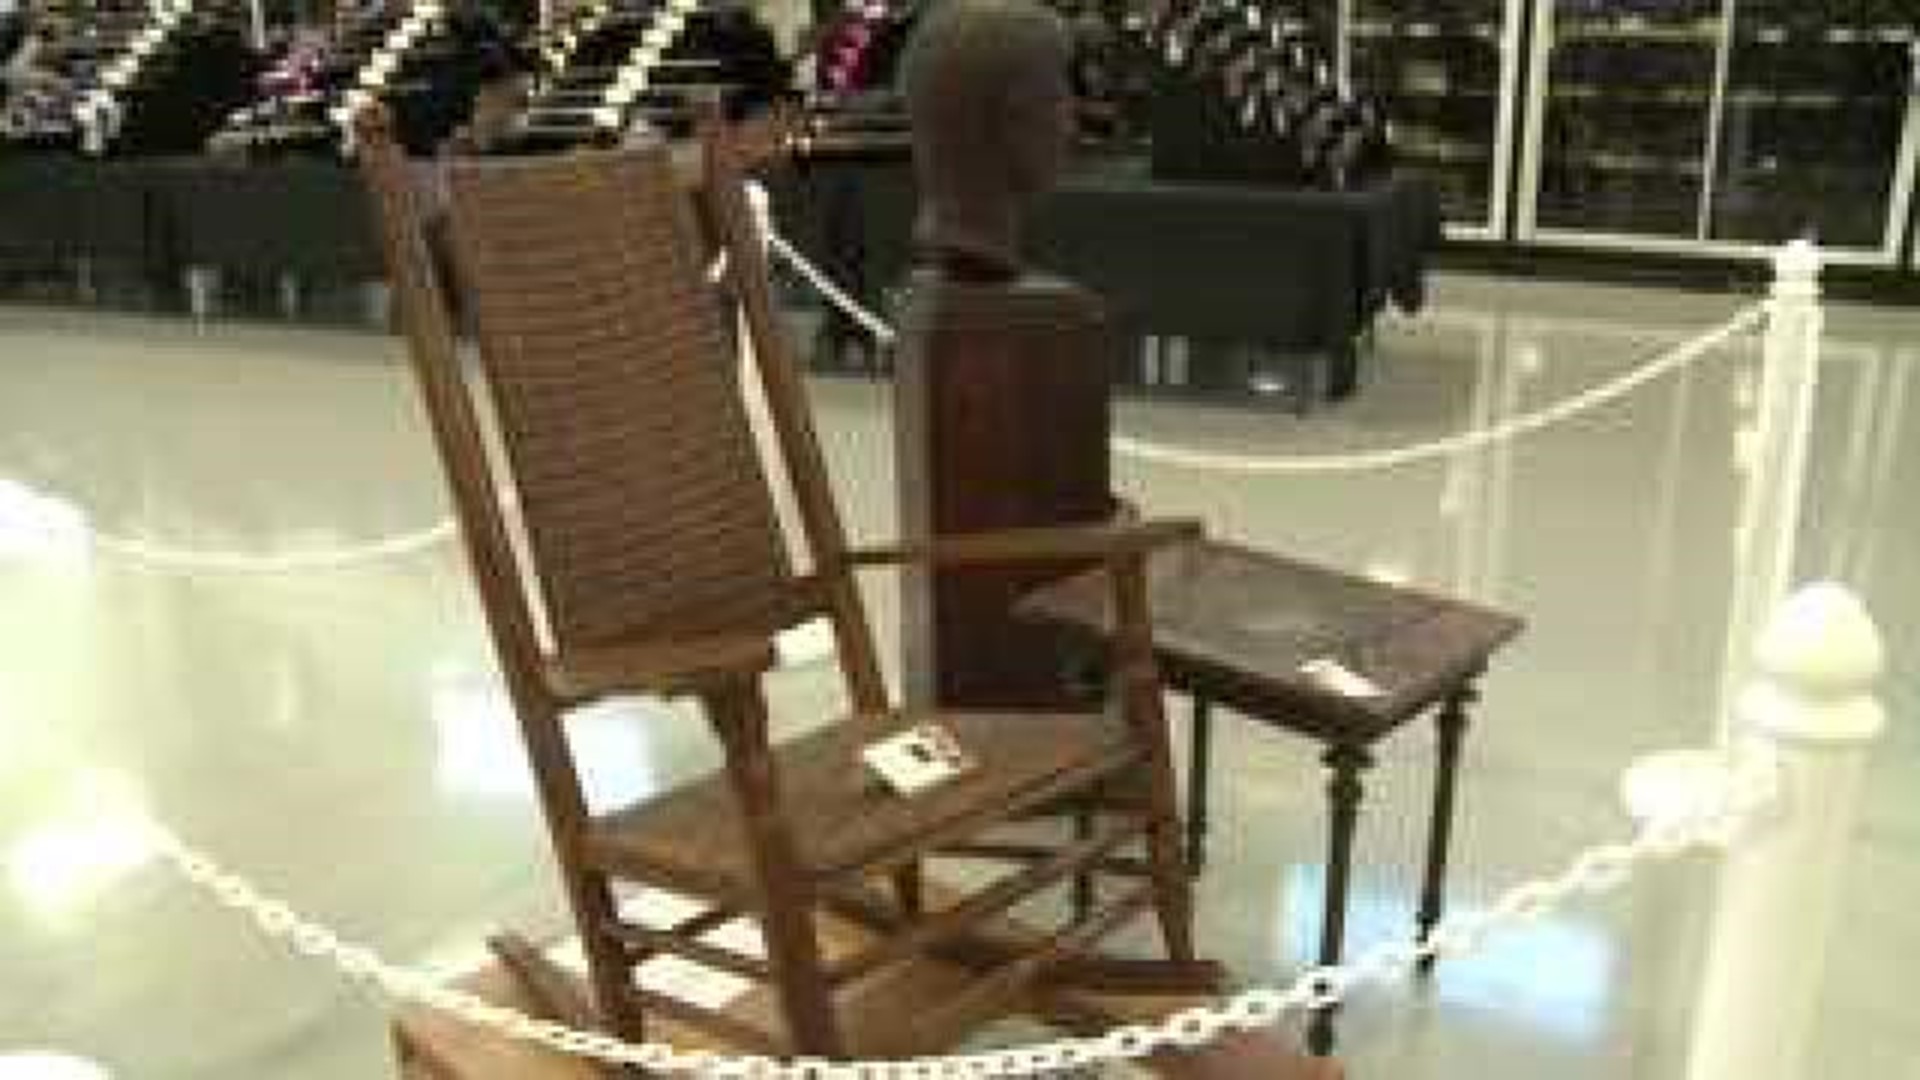 JFK rocking chair up for auction